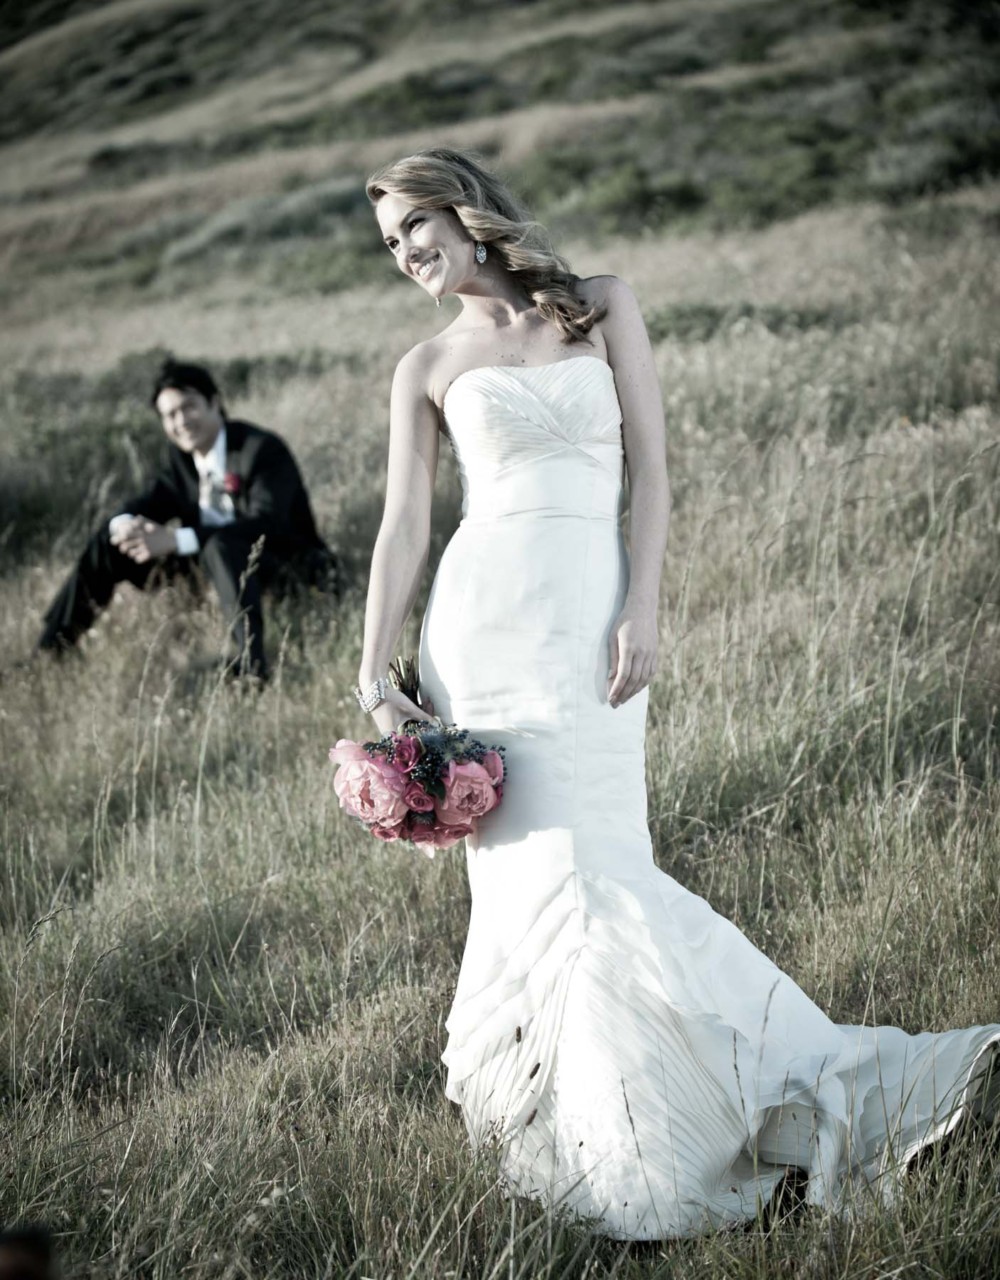 Looking for a top wedding photographer in Eagle River?